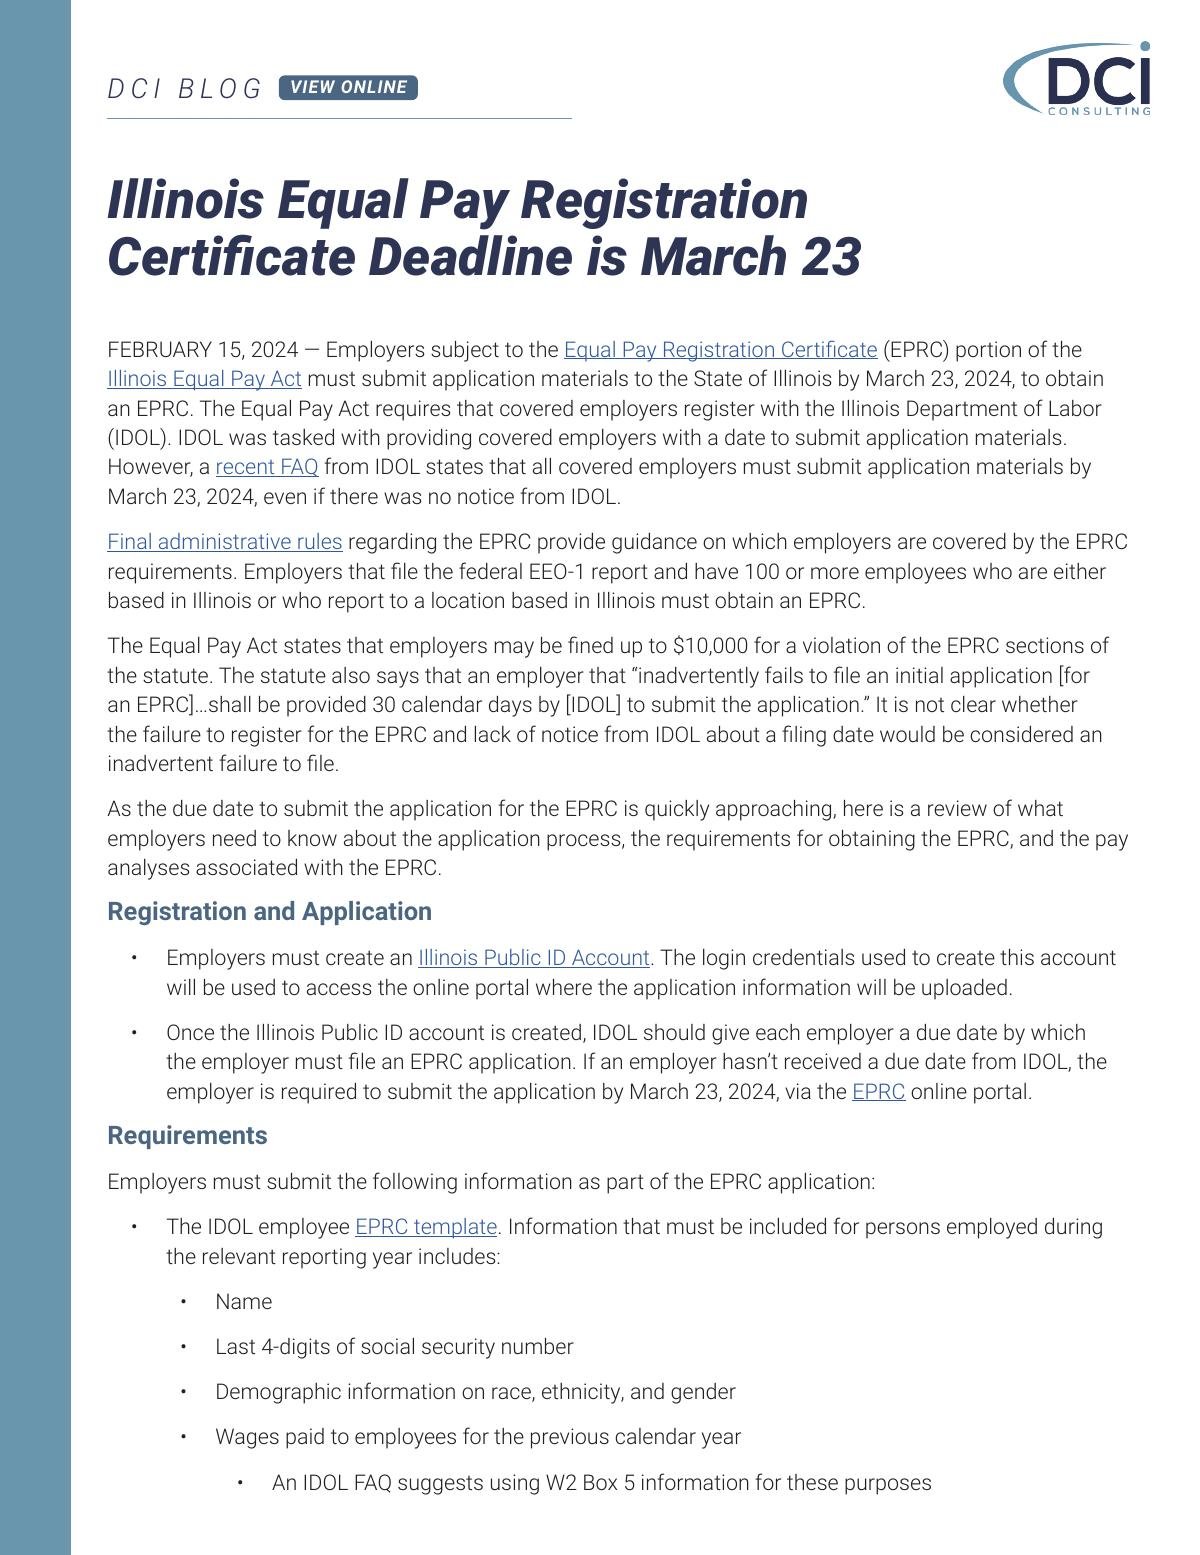 Illinois Equal Pay Registration Certificate; Deadline is March 23